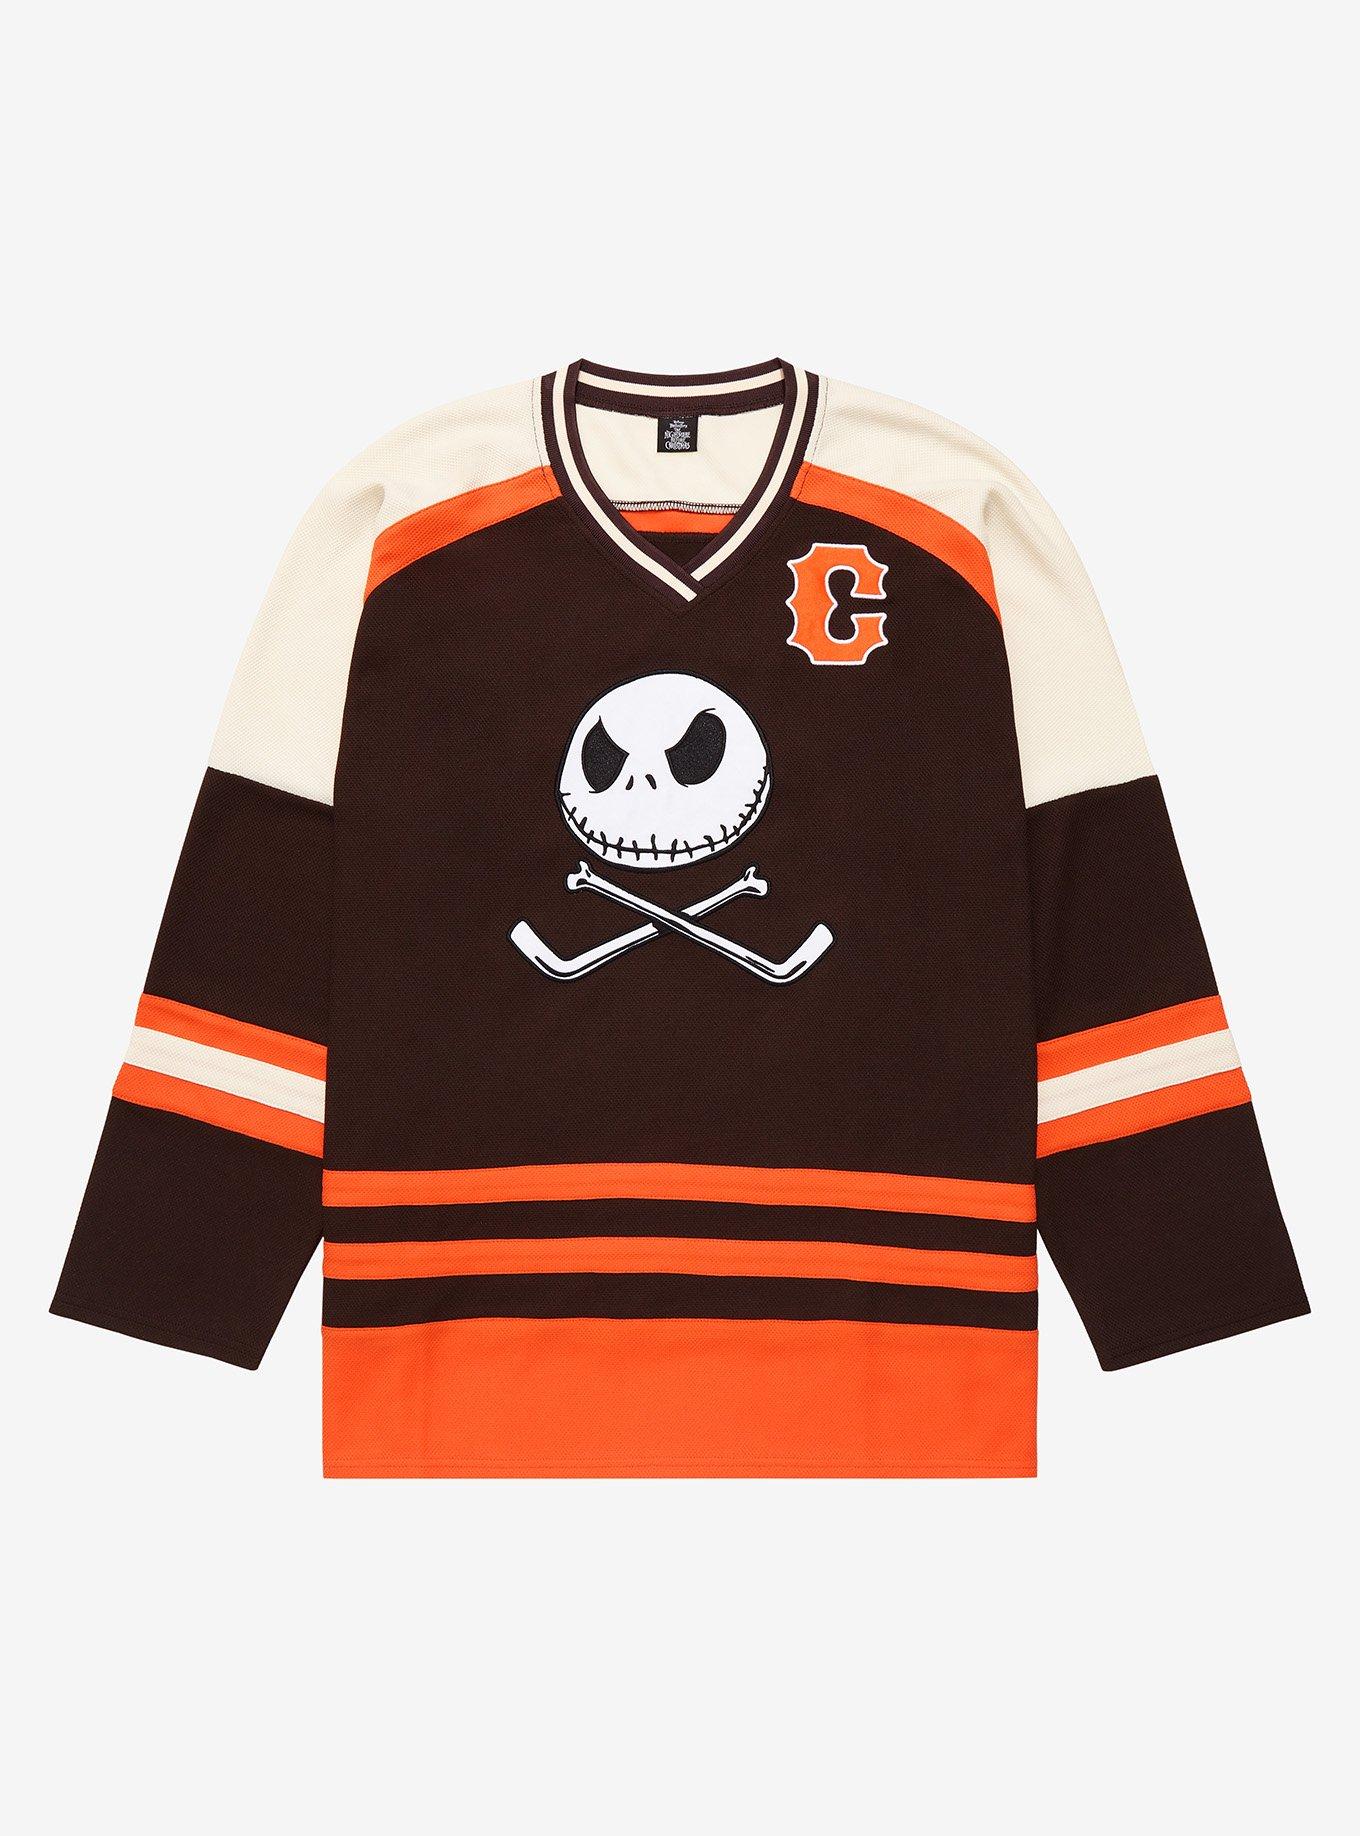 Do you think the whole jersey over hoodies / sweater look is strange?